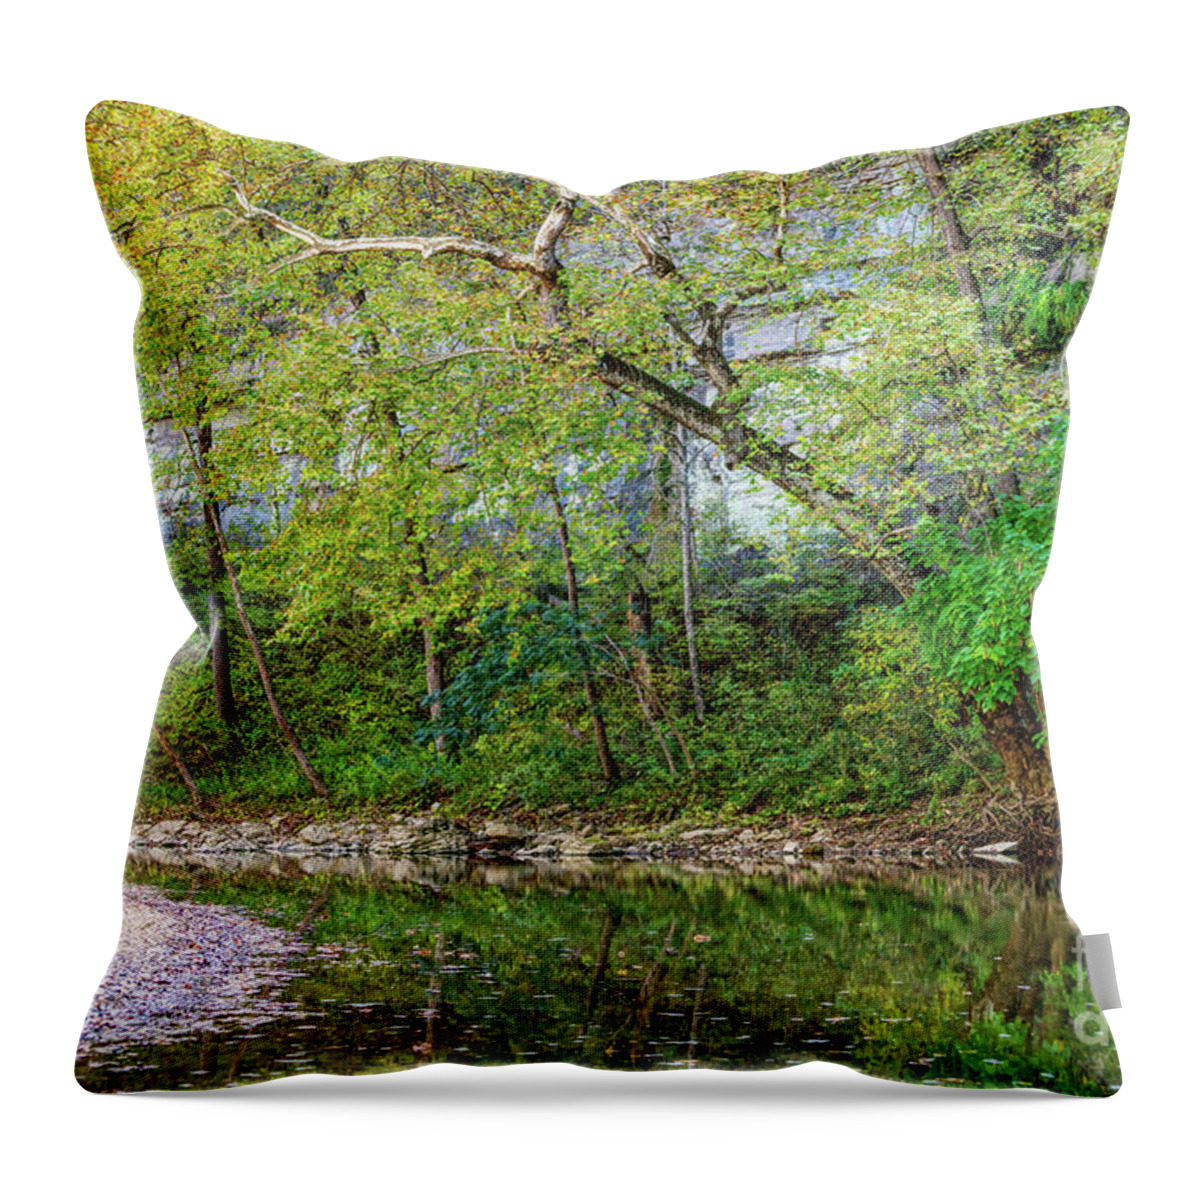 Buffalo National River Throw Pillow featuring the photograph In The Shade At Buffalo National River by Jennifer White